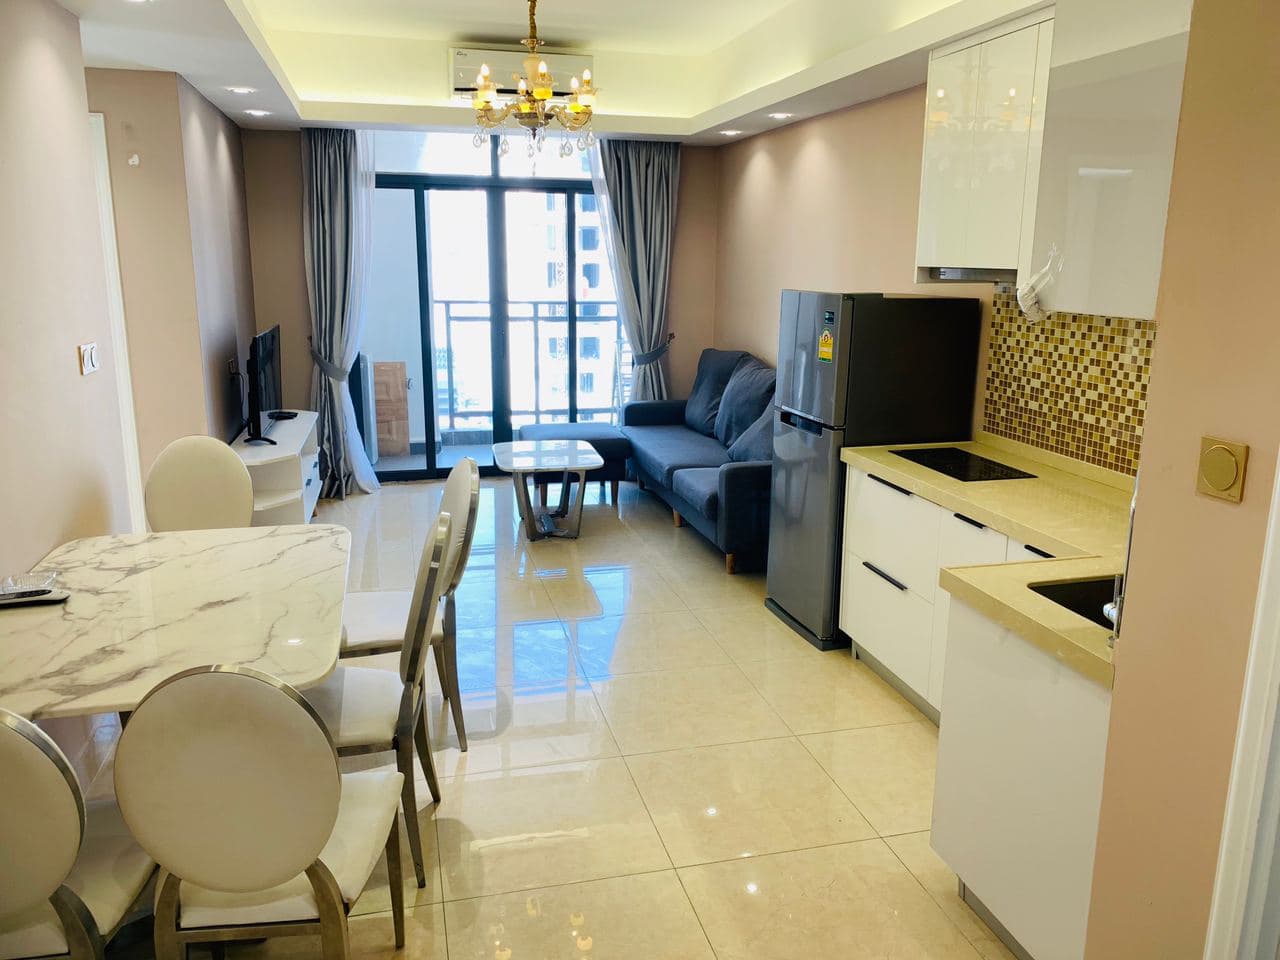 Beautiful Service – 2 Bedrooms Apartment for rent in BKK available now